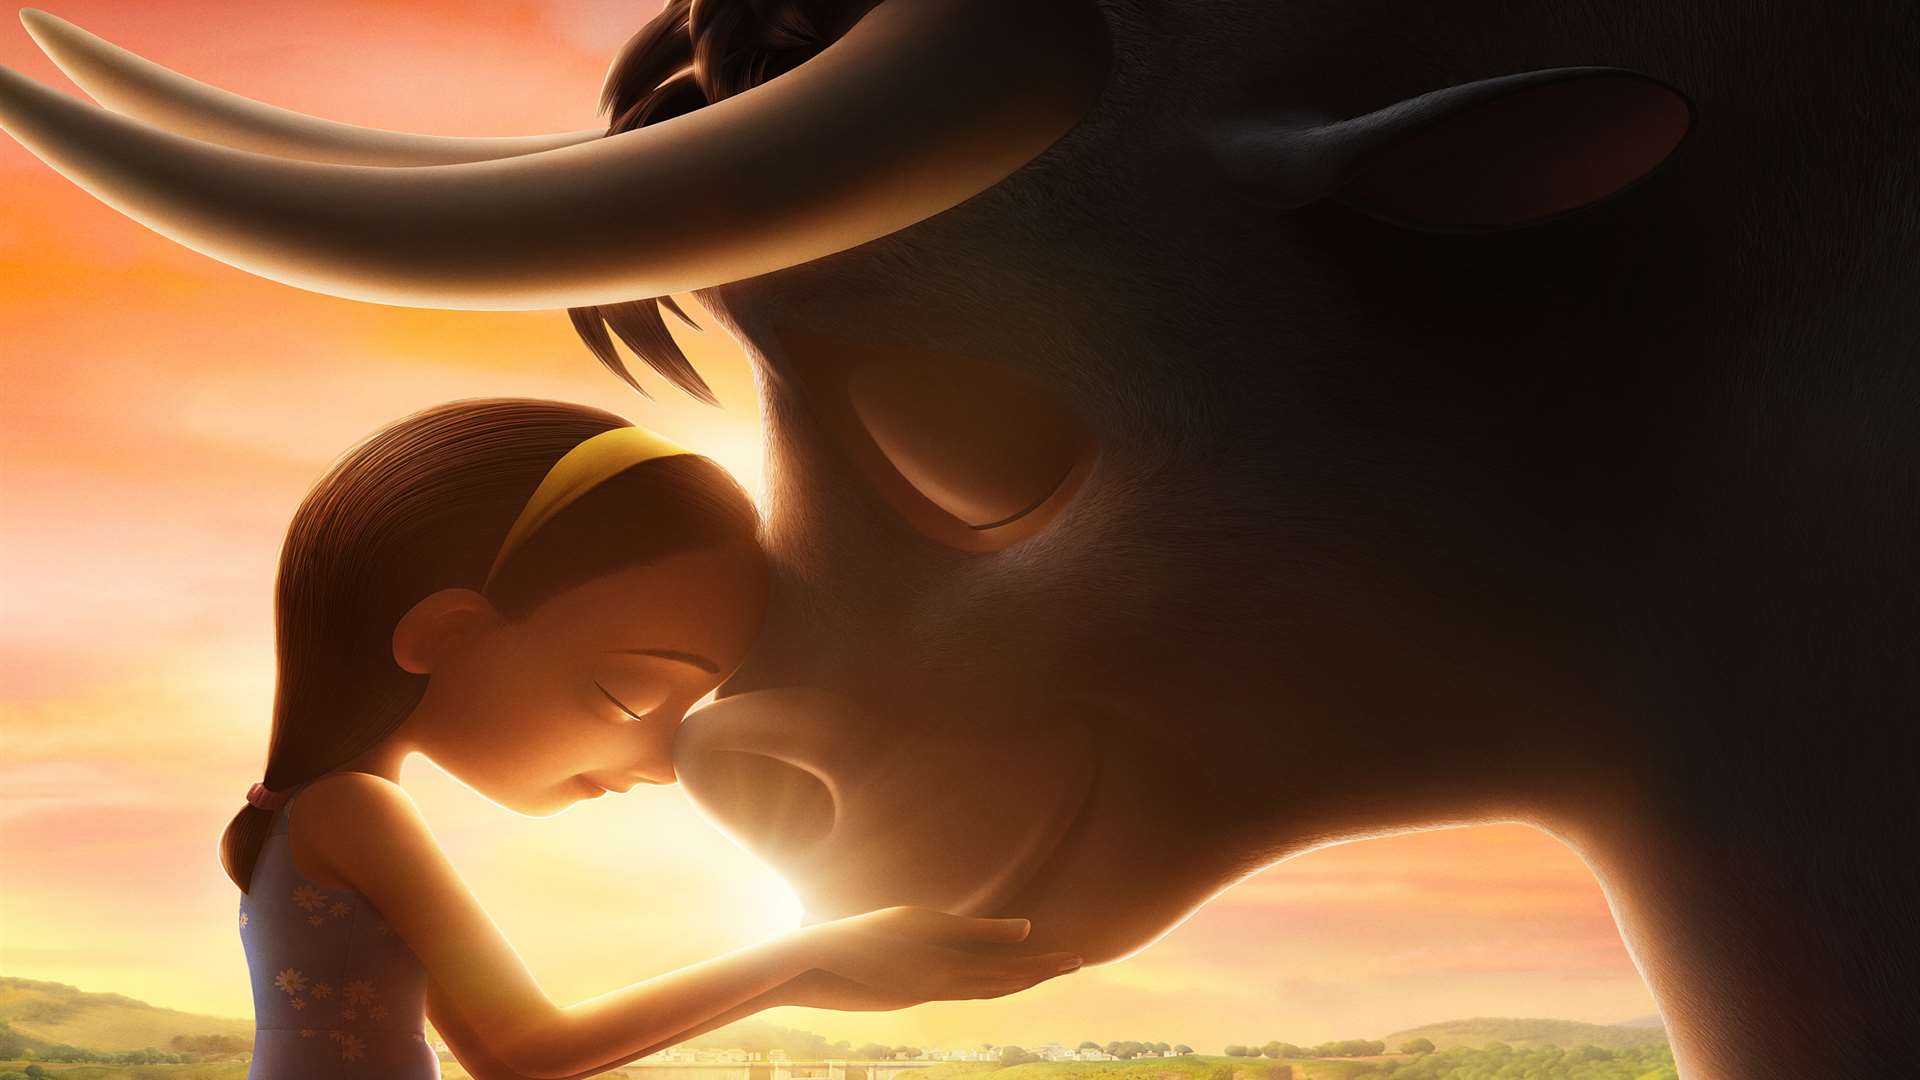 Directed by Carlos Saldanha, Ferdinand is a Spanish fighting bull who prefers smelling flowers rather than chasing after matadors